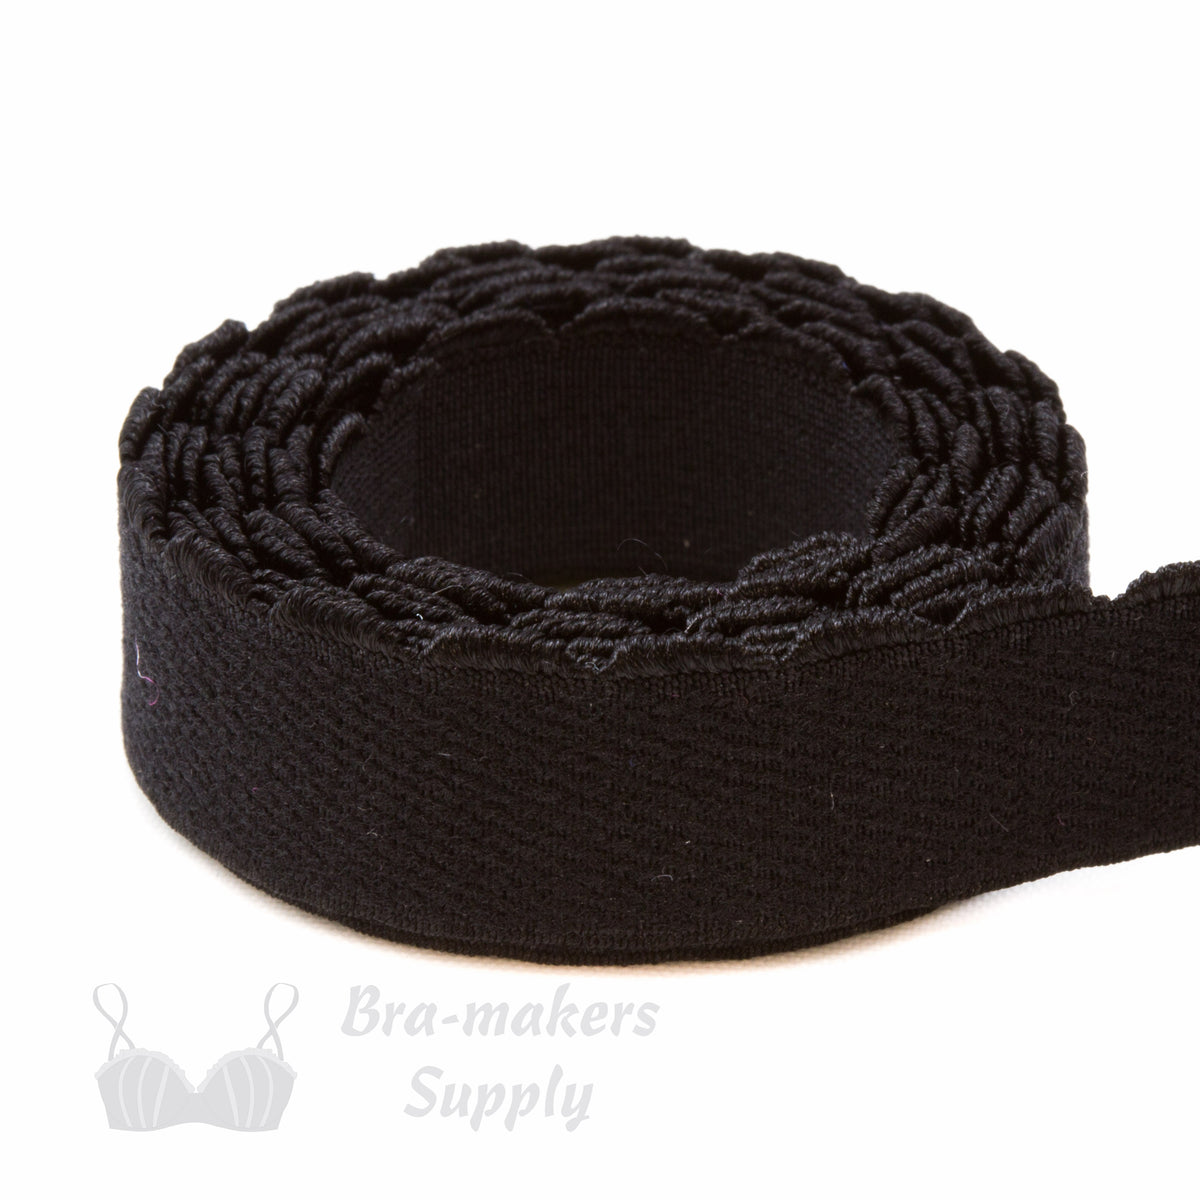 http://themakehouse.ca/cdn/shop/products/half-inch-12-mm-firm-bra-band-elastic-EB-472-black-or-half-inch-12-mm-plush-back-elastic-anthracite-Pantone-19-4007-from-Bra-Makers-Supply-1-metre-roll-shown_1200x1200.jpg?v=1583956944